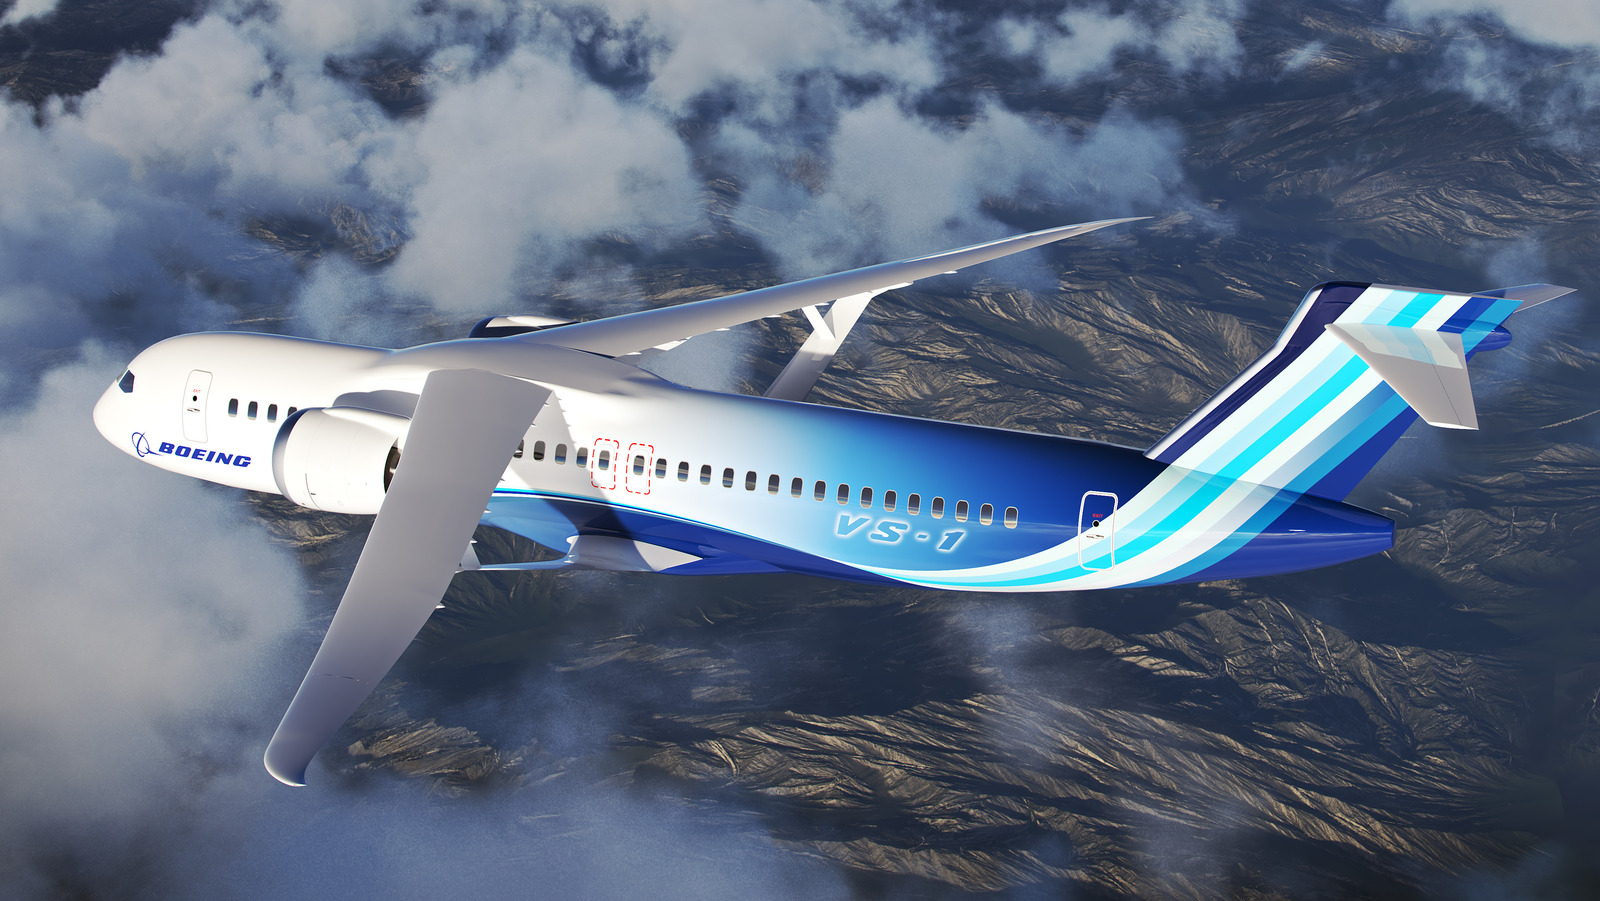 NASA And Boeing Team Up On Greener Tech You Don’t Need To Be An Astronaut To Enjoy – SlashGear